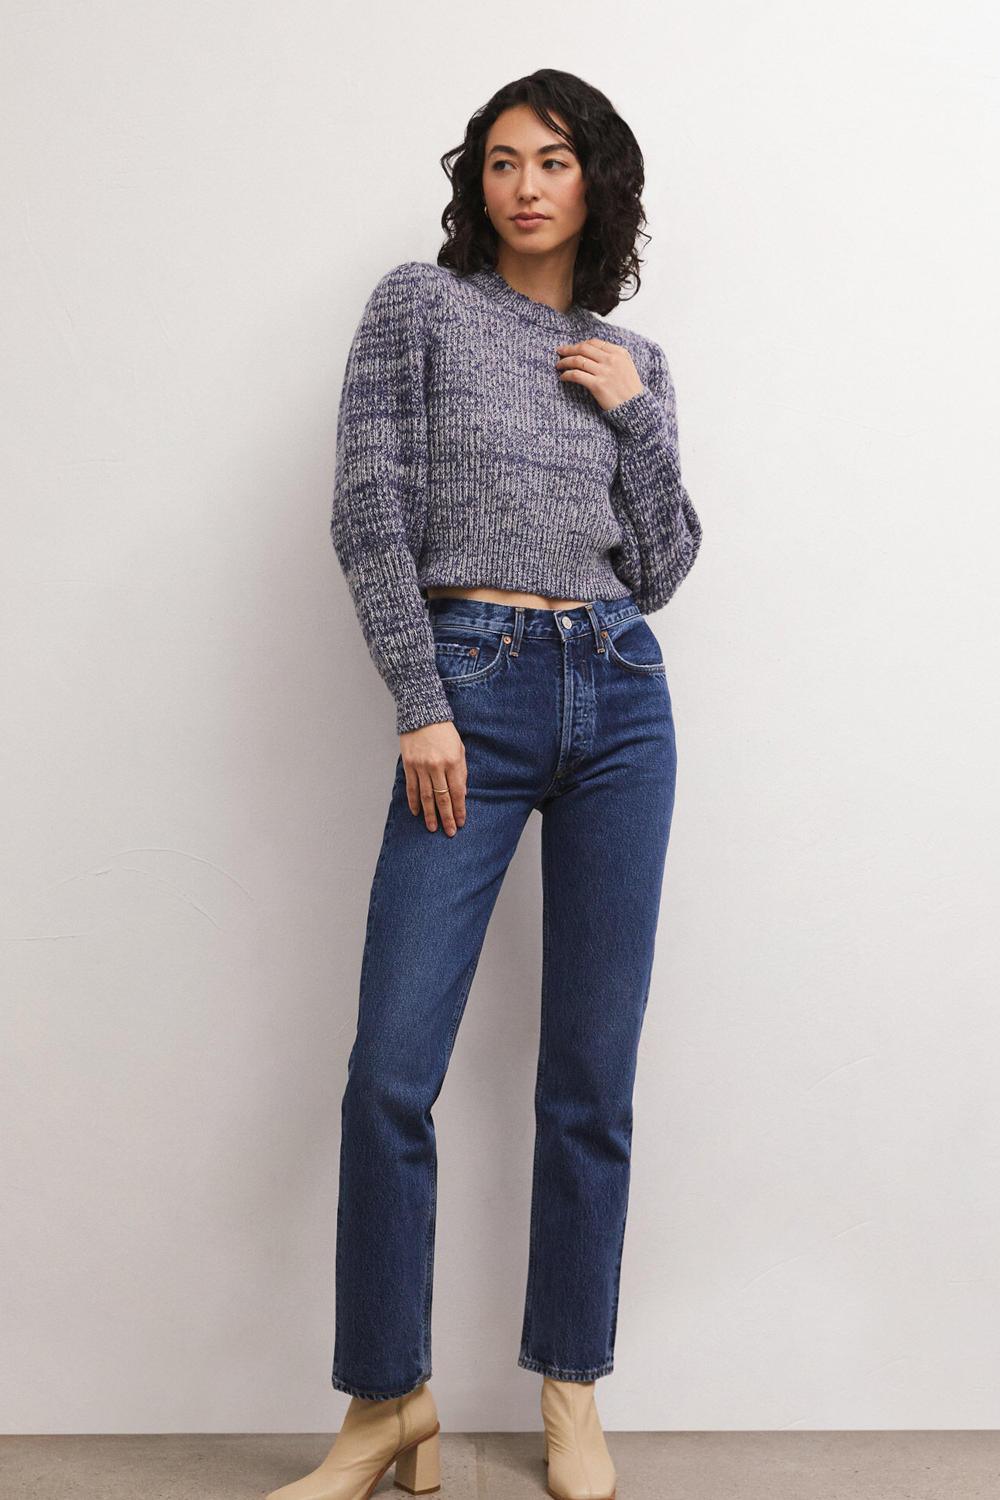 Polly Denim Look Sweater - Strawberry Moon Boutique